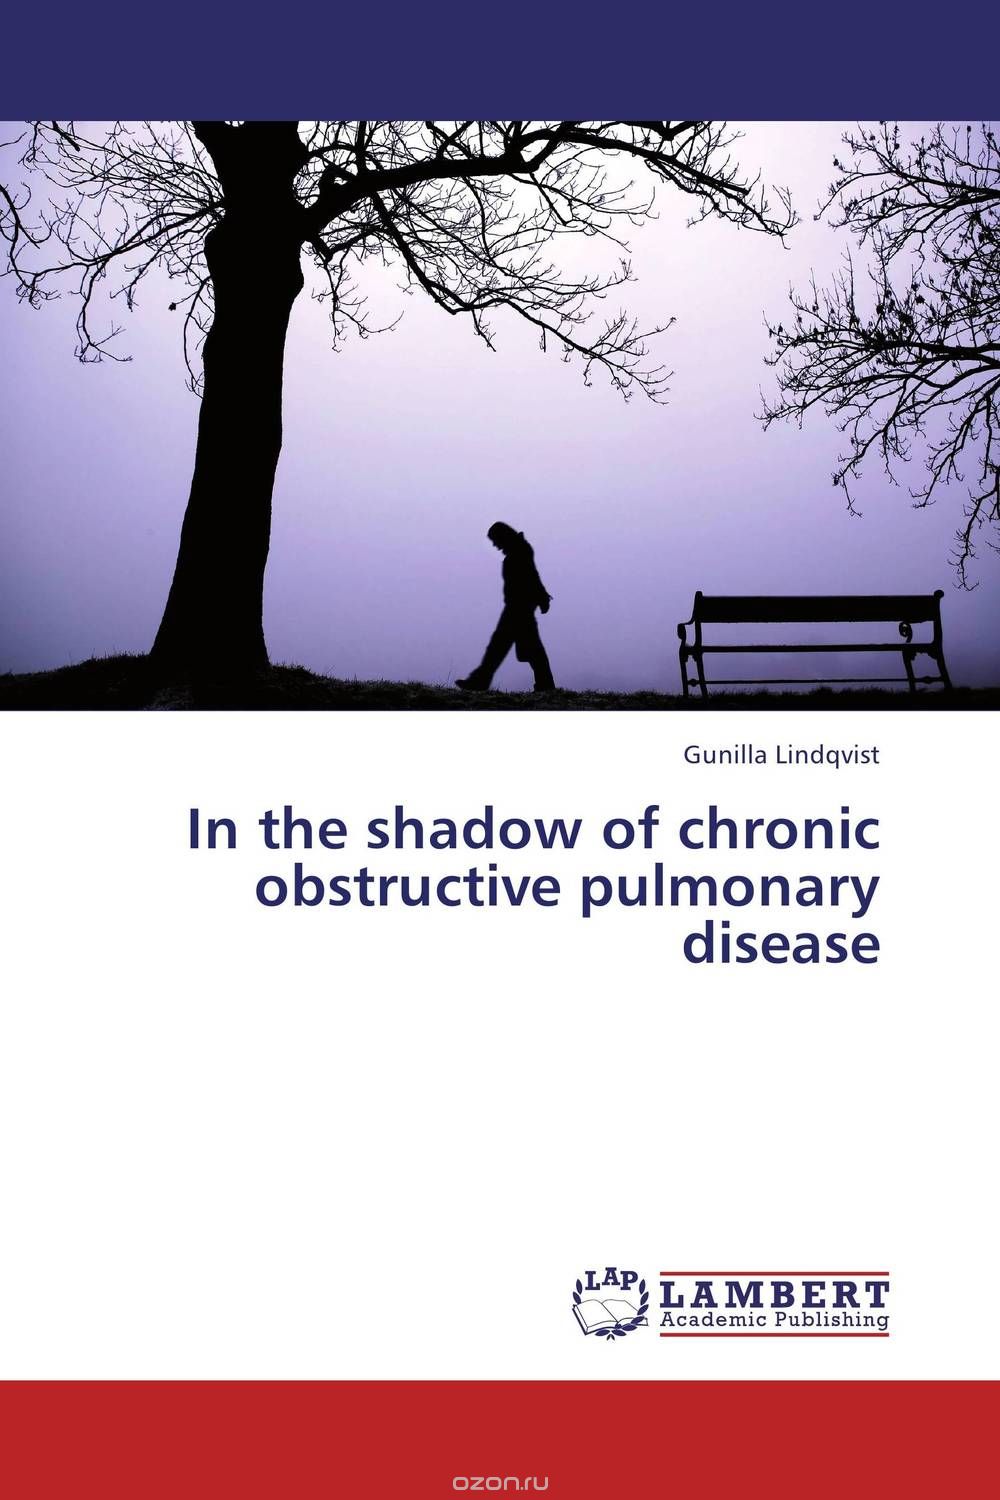 In the shadow of chronic obstructive pulmonary disease